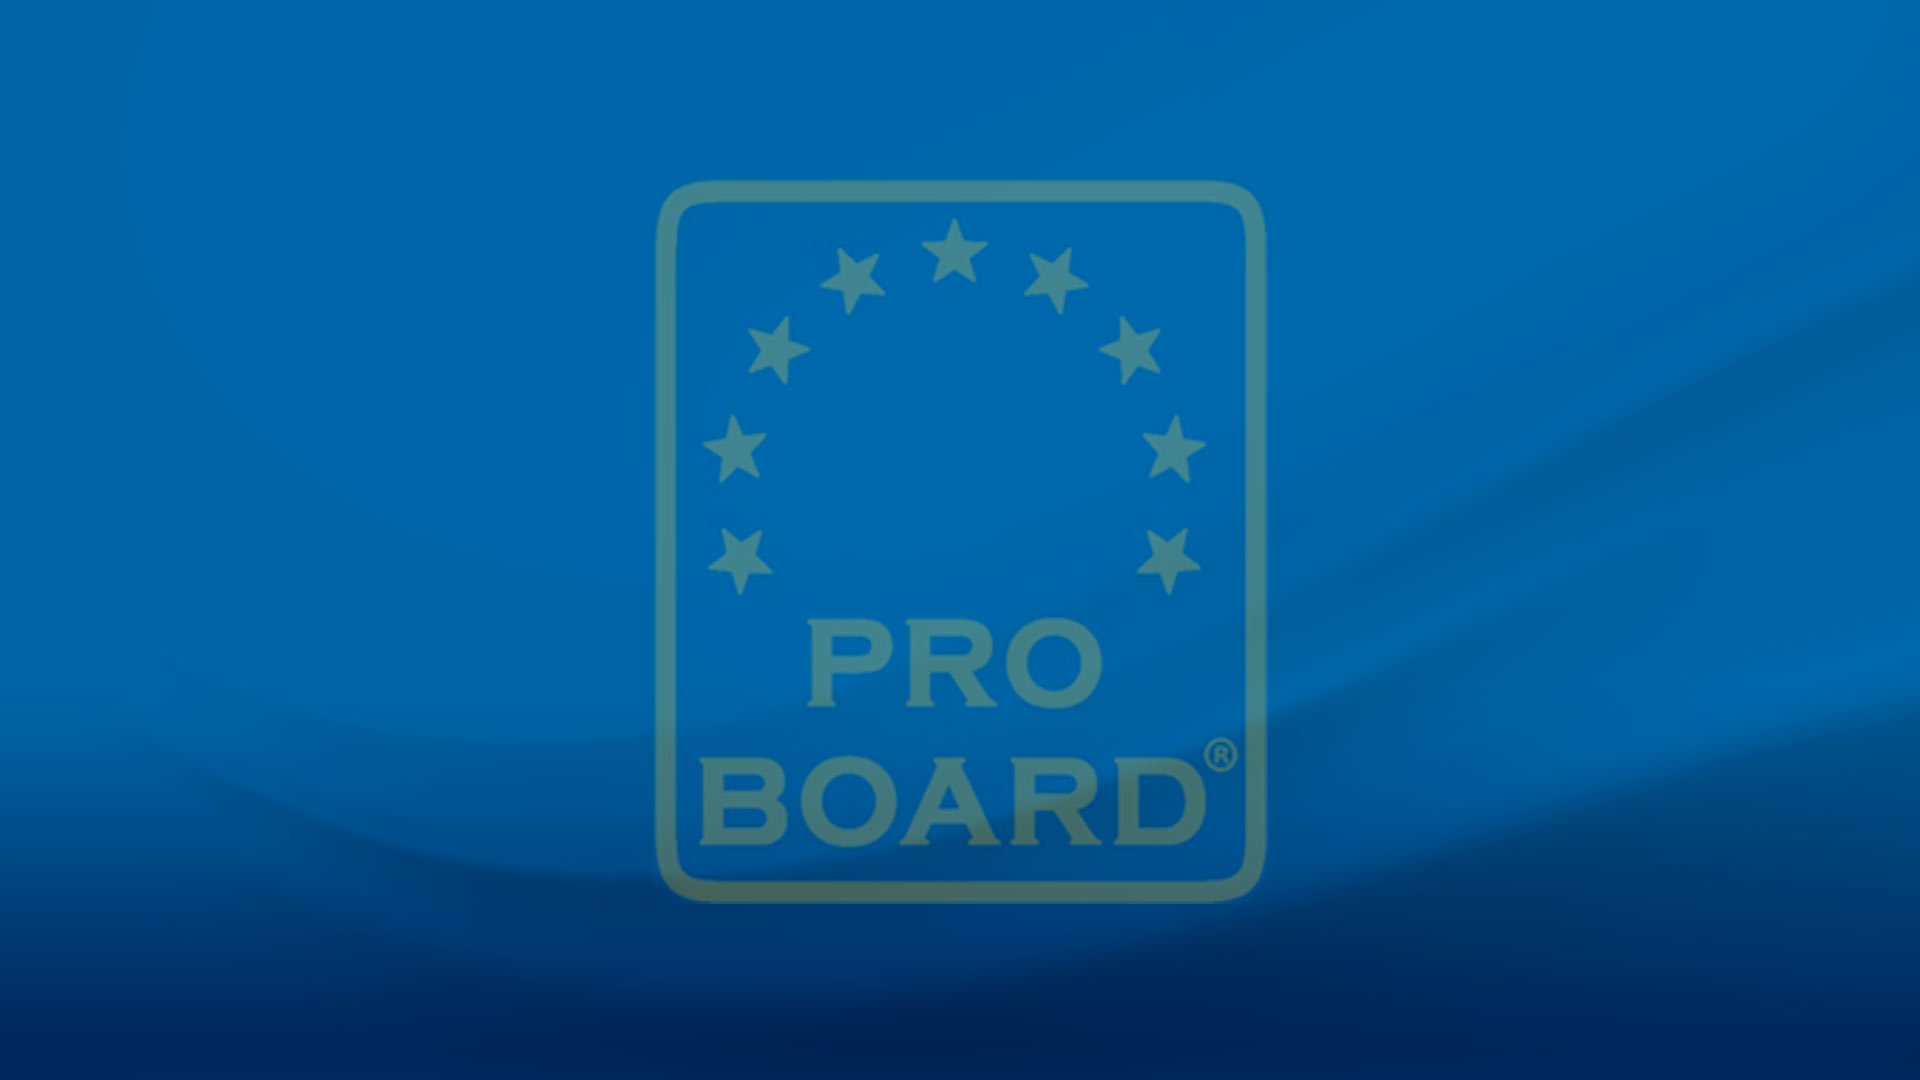 Blue background with Pro Board logo